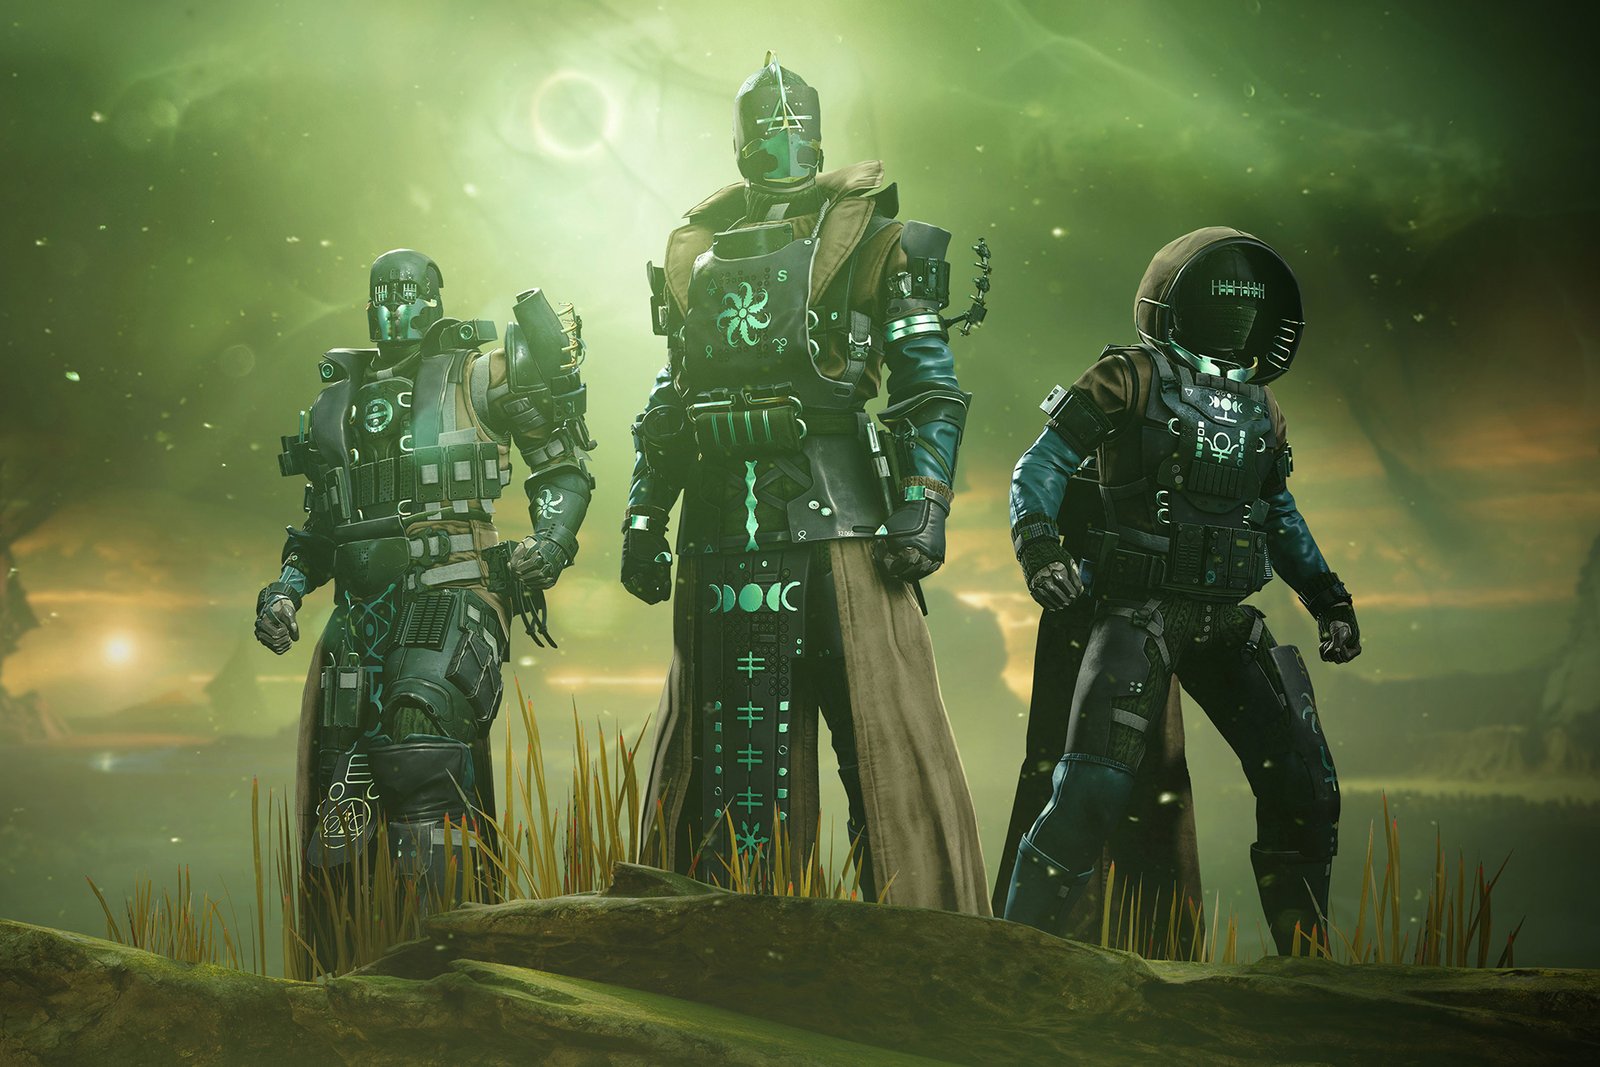 Bungie lawsuit targets to unmask YouTube copyright claim abusers